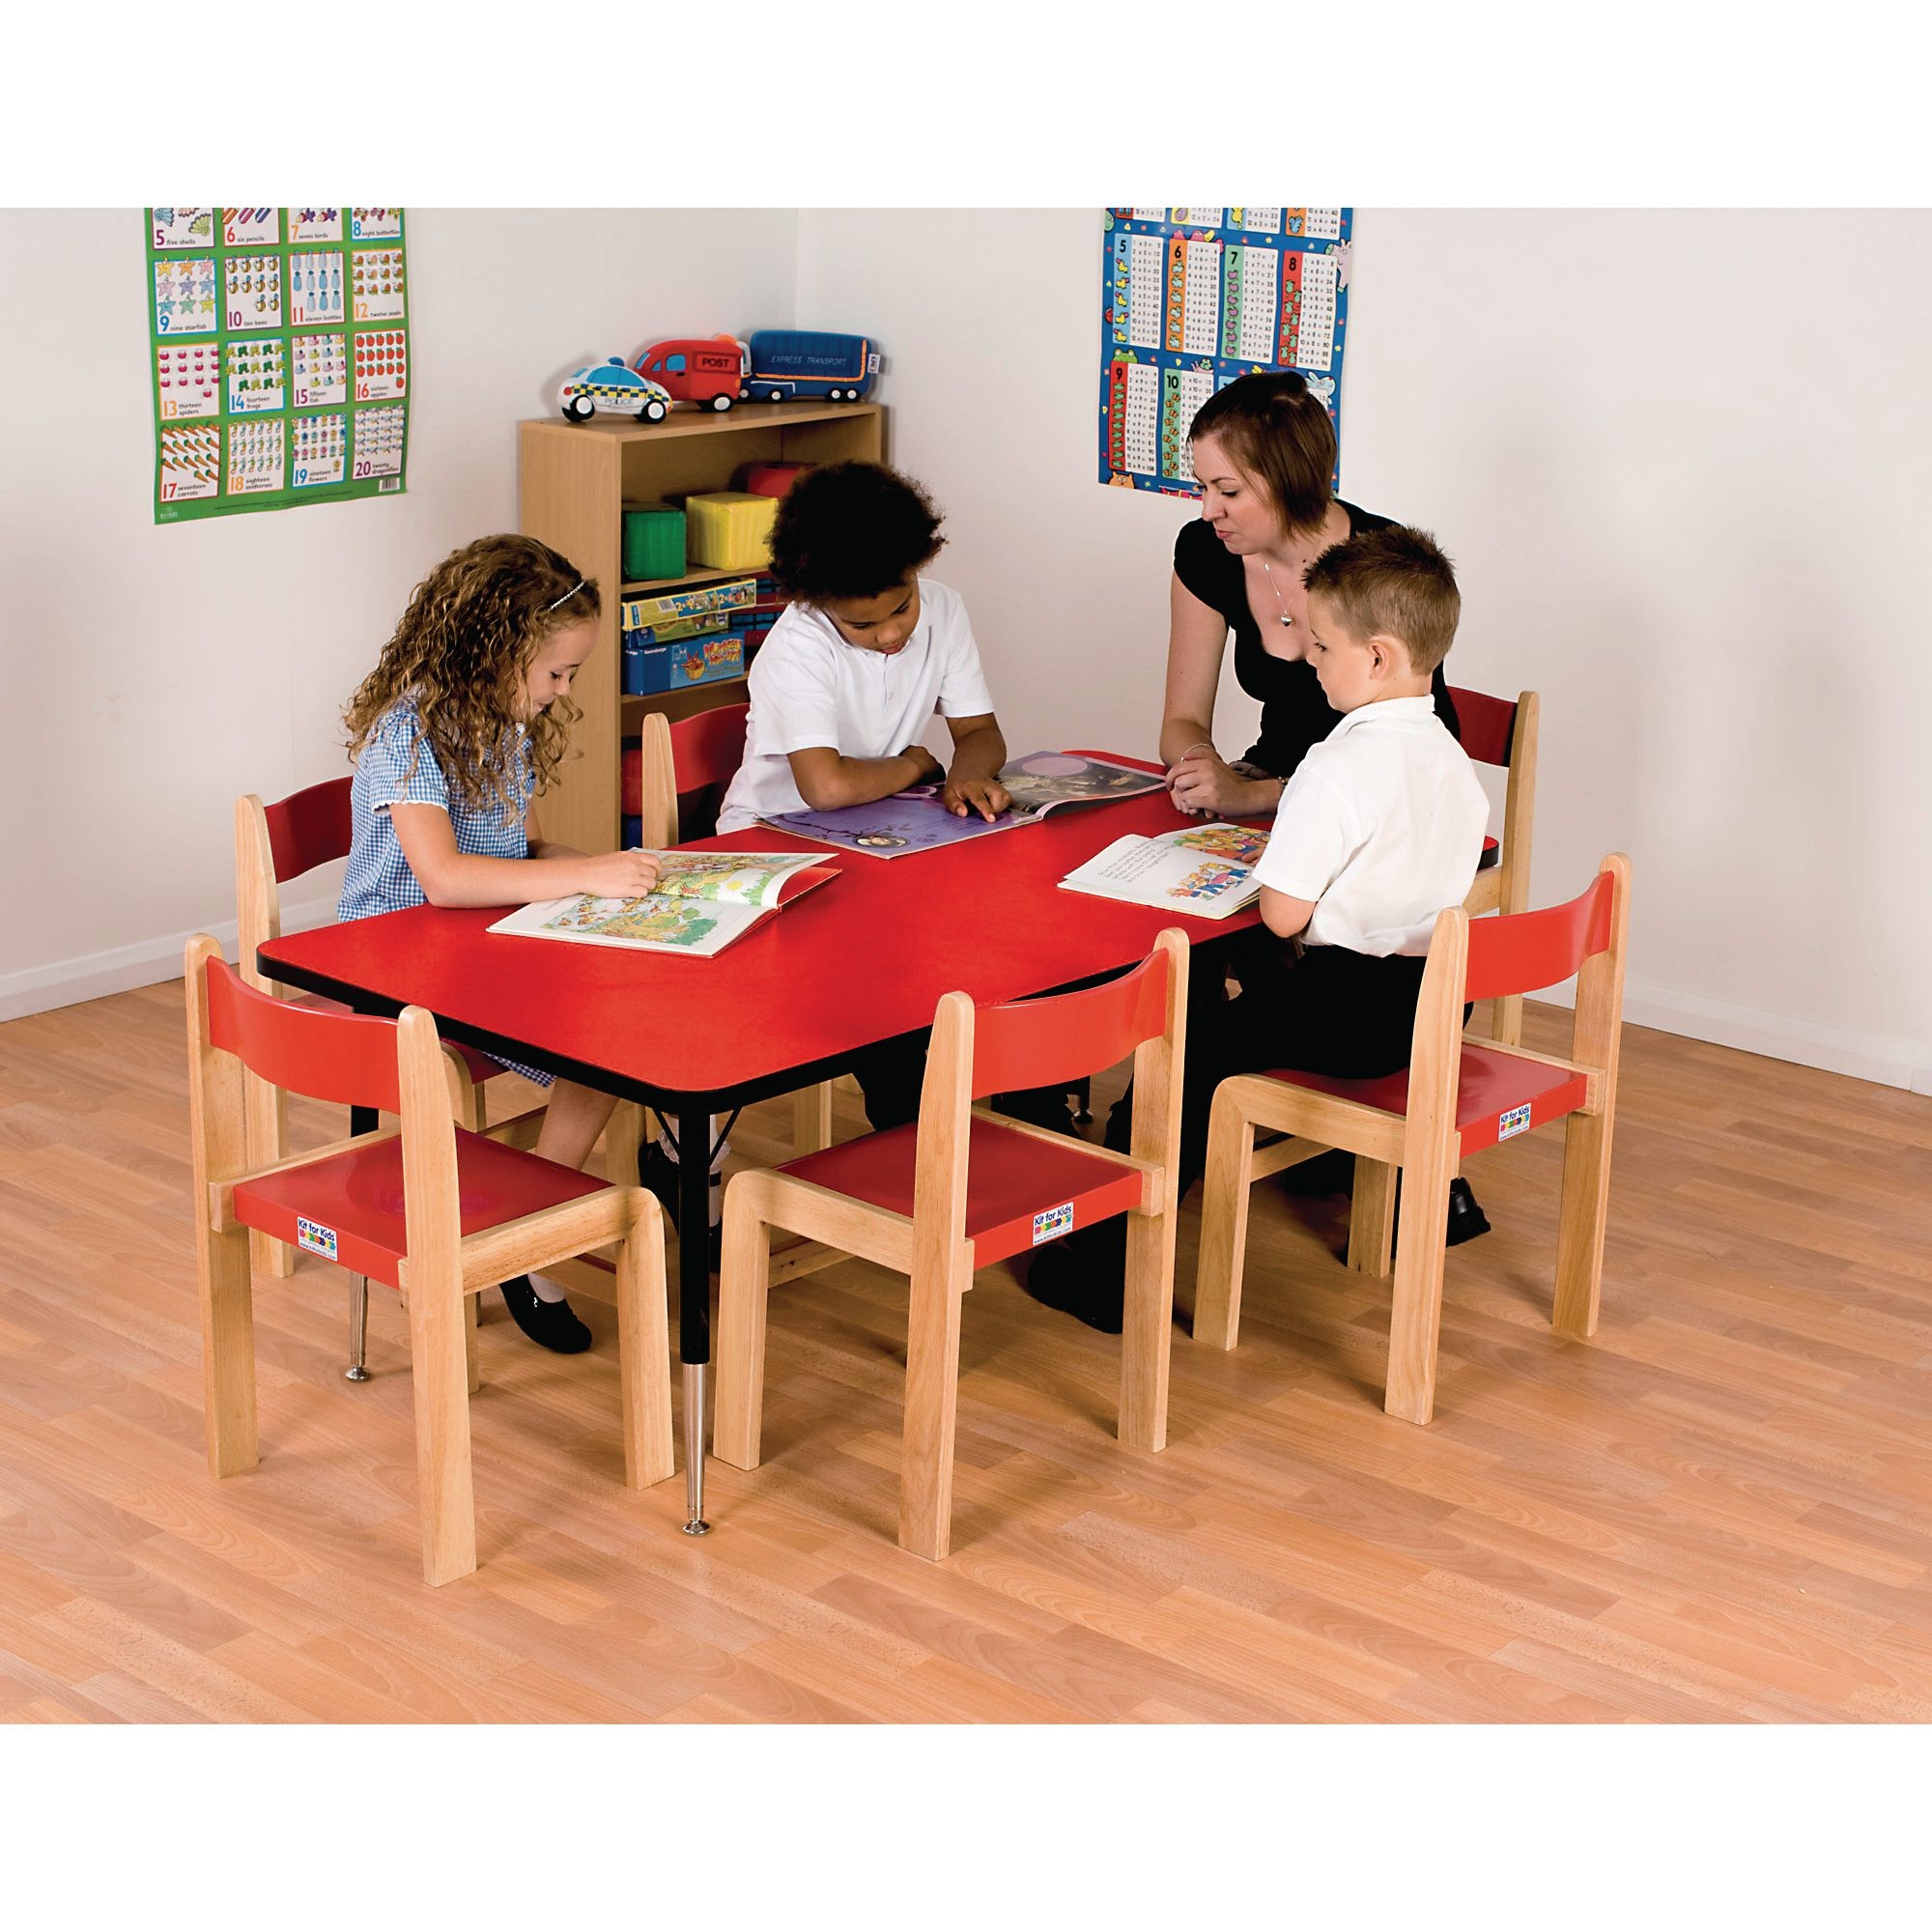 Tuf-Top Rectangular Height Adjustable Classroom Table - 1500 x 750 x 430 to 635mm - Red